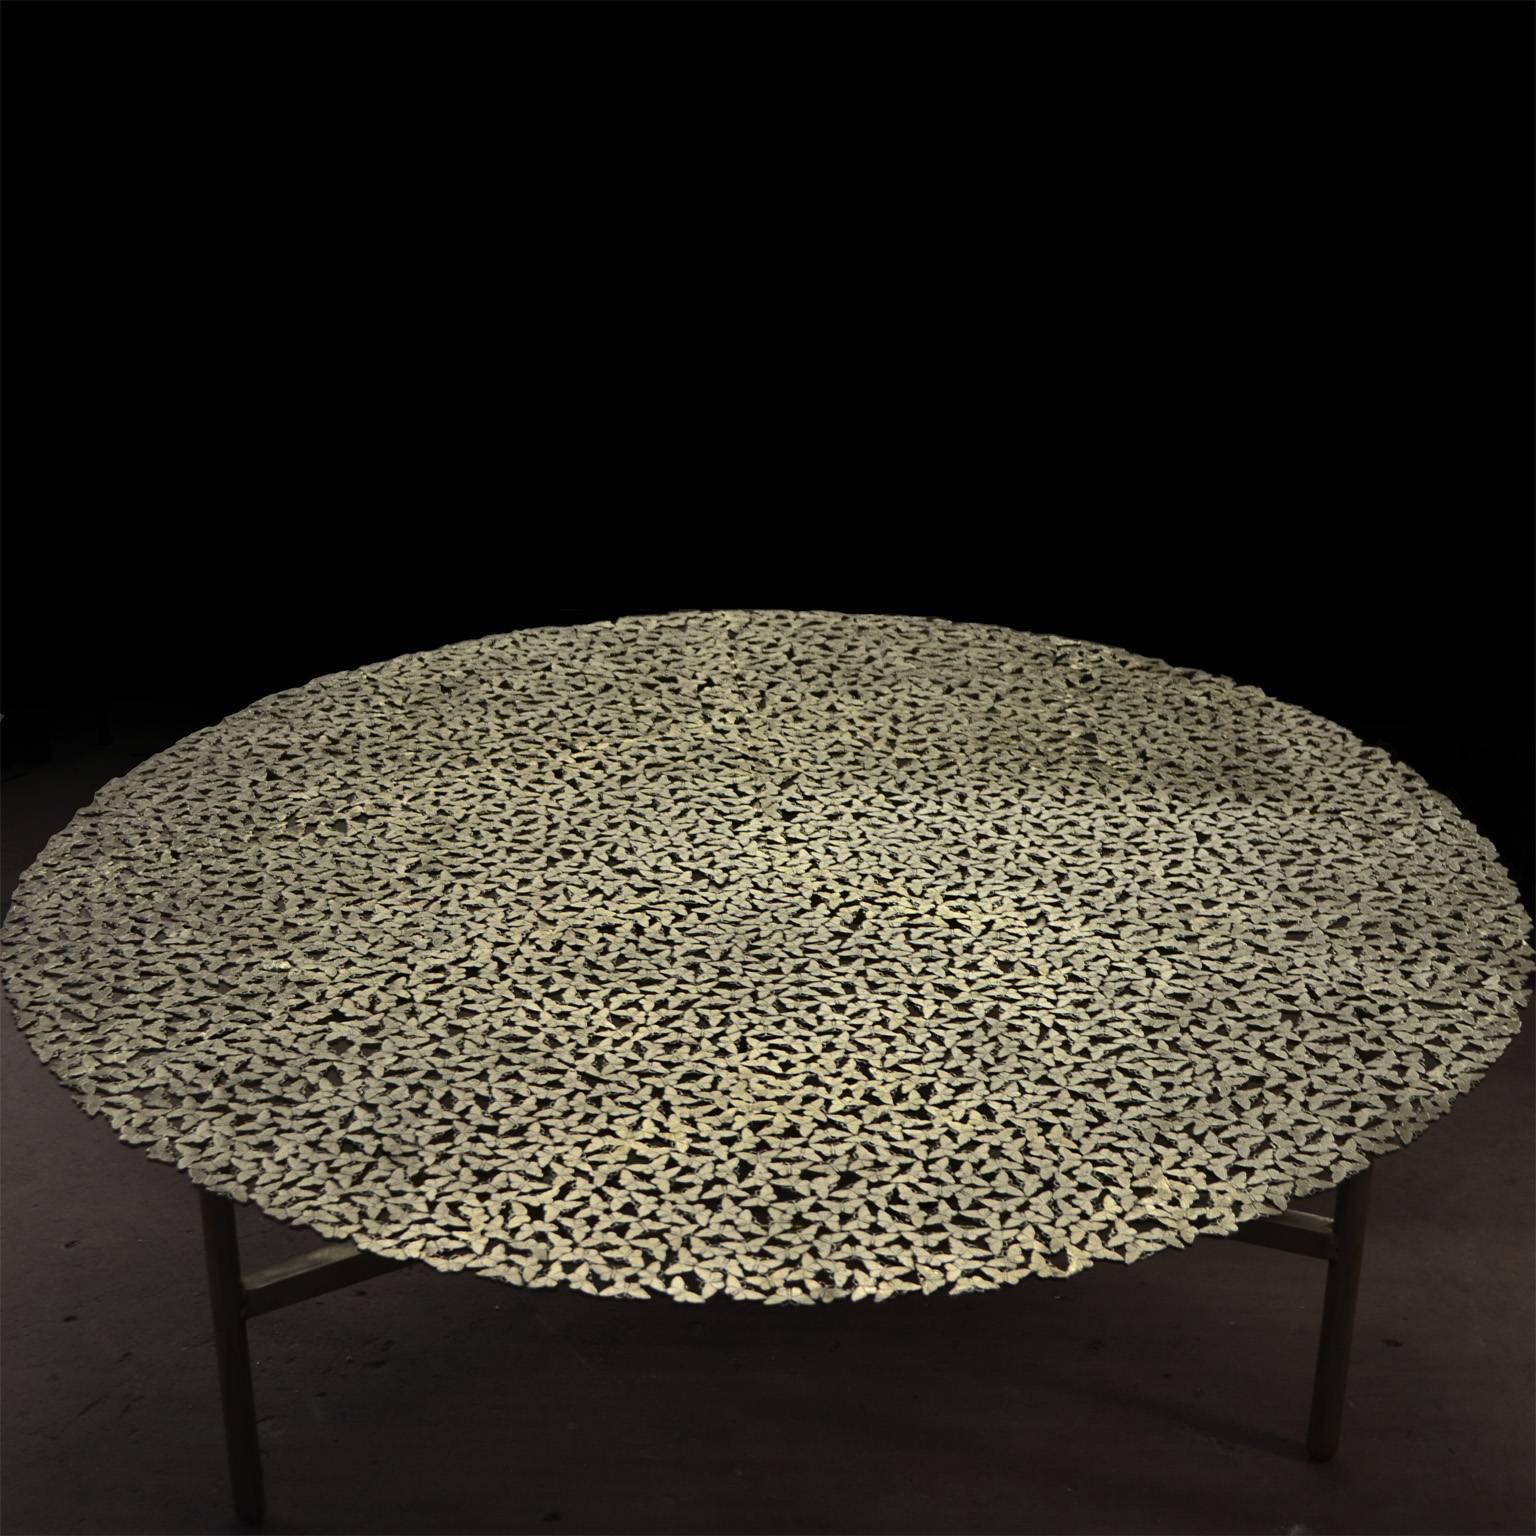 A swarm of butterflies as delicate as a lace table cloth forms an everlasting table top in white bronze, lost wax cast by Italian master craftsmen. A sculptural table for both indoor and outdoor use.

This listing is for the coffee table version,